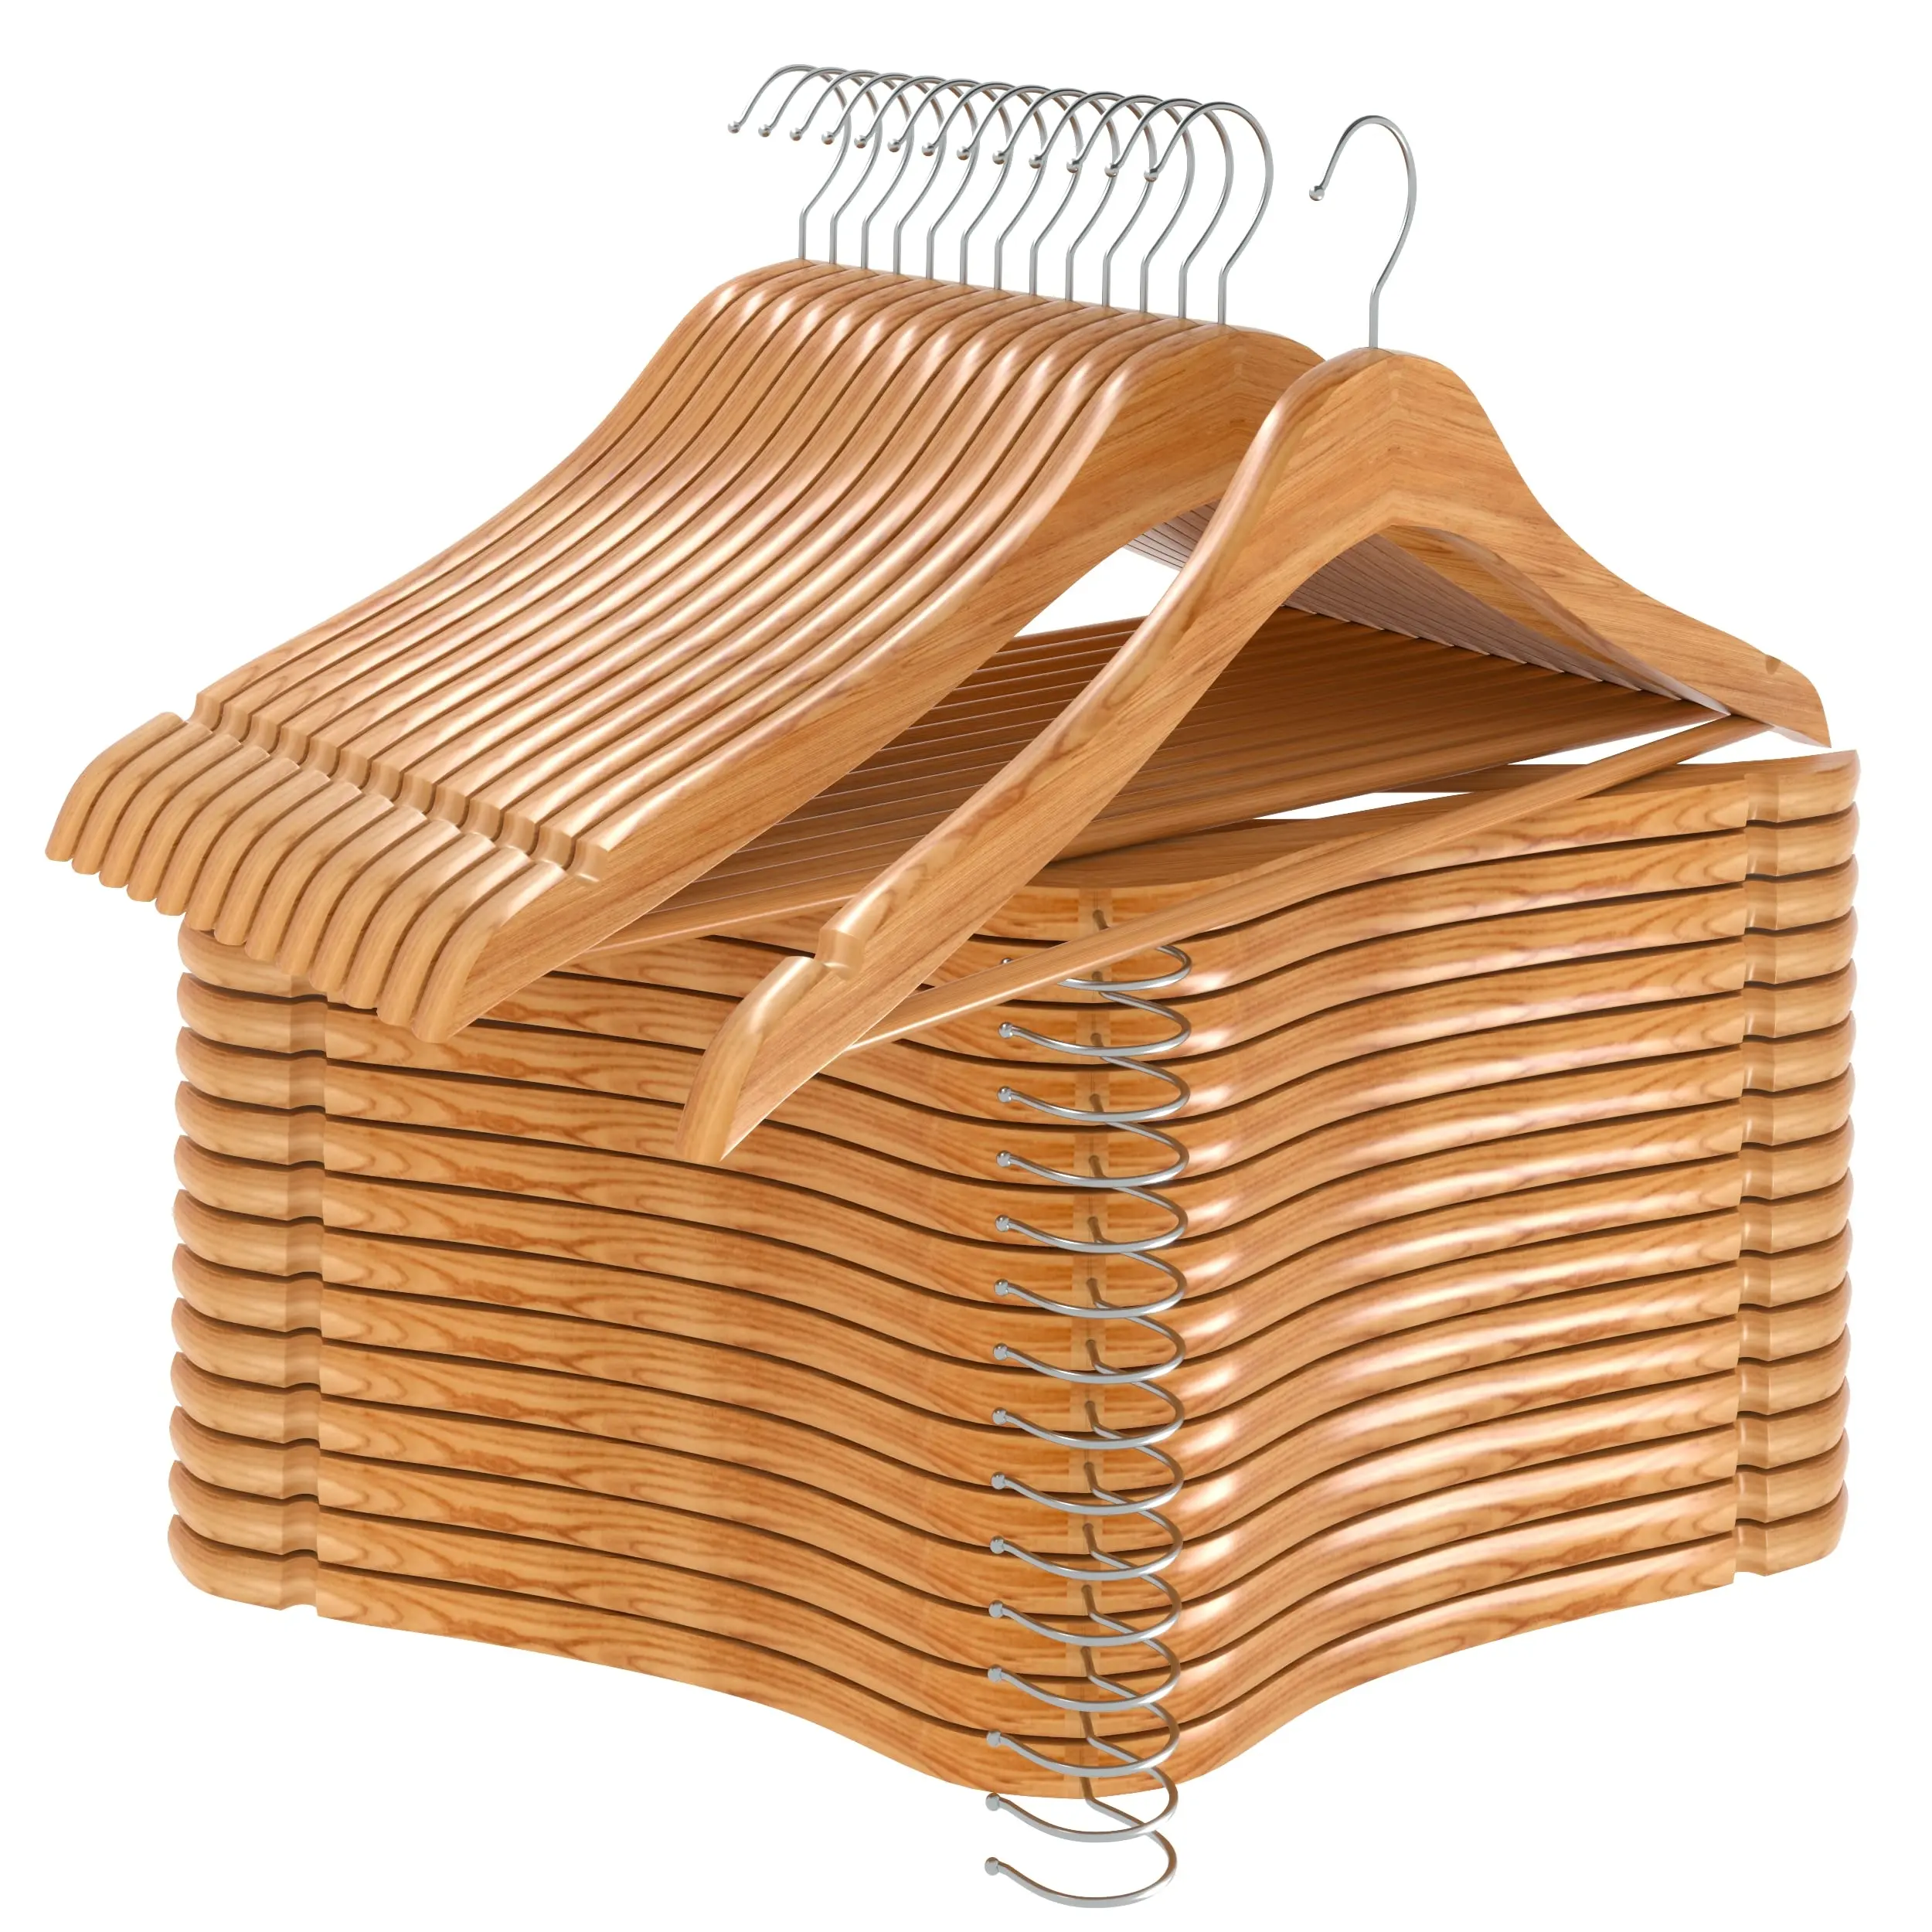 Wooden Hangers Suit Hangers with 360-Degree Rotatable Hook - Wood Hangers with Shoulder Grooves